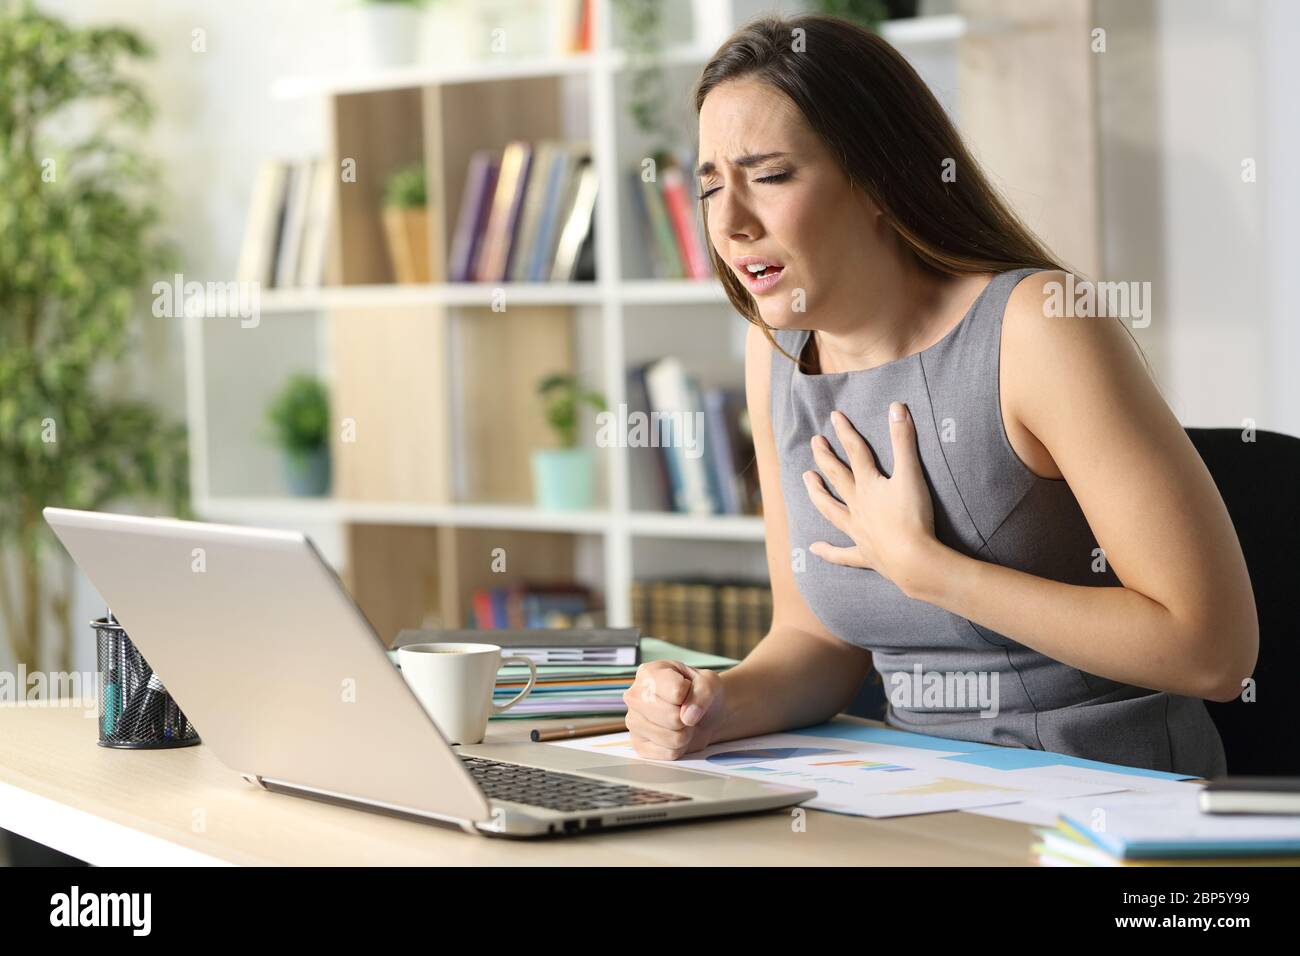 Entrepreneur woman wheezing having breathing difficulties sitting on a desk at homeoffice Stock Photo